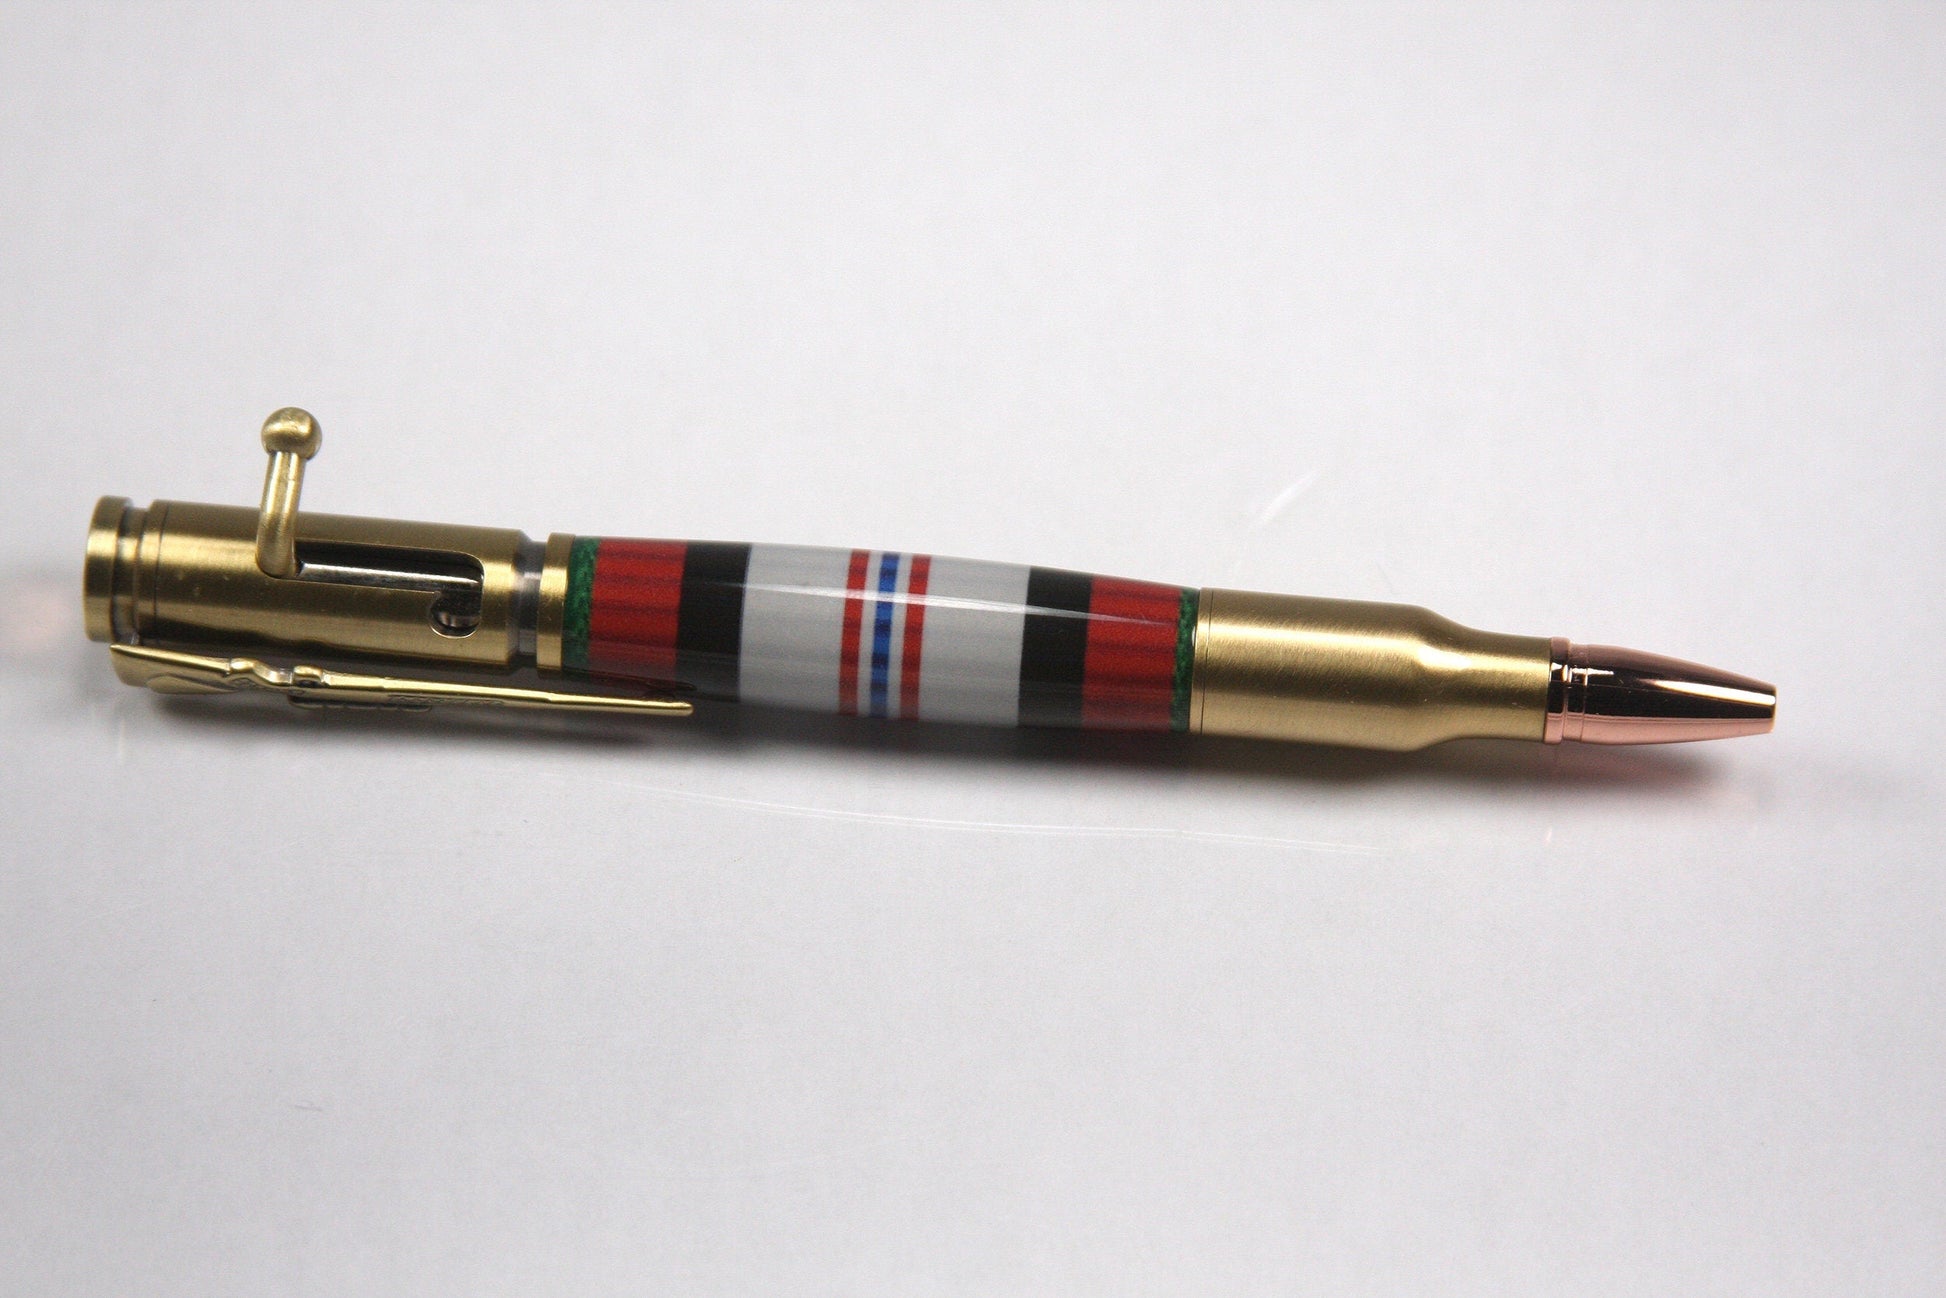 Bolt Action Pen. Hand crafted Acrylic Pen with Antique Brass